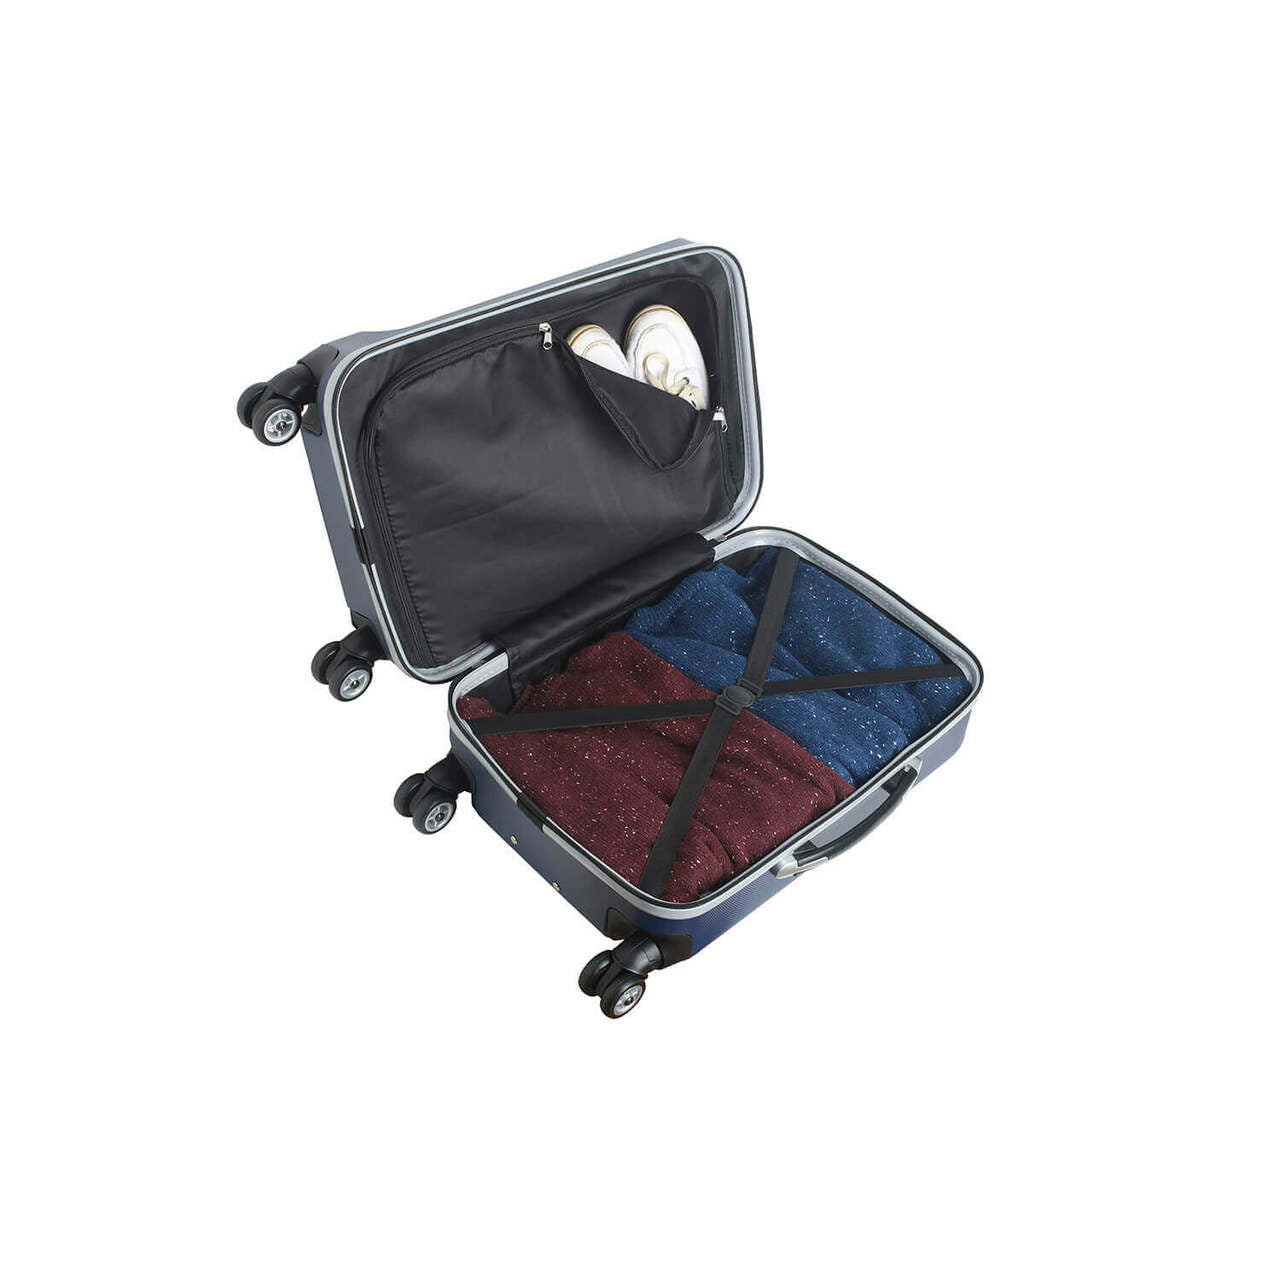 New York Mets 20" Navy Domestic Carry-on Spinner